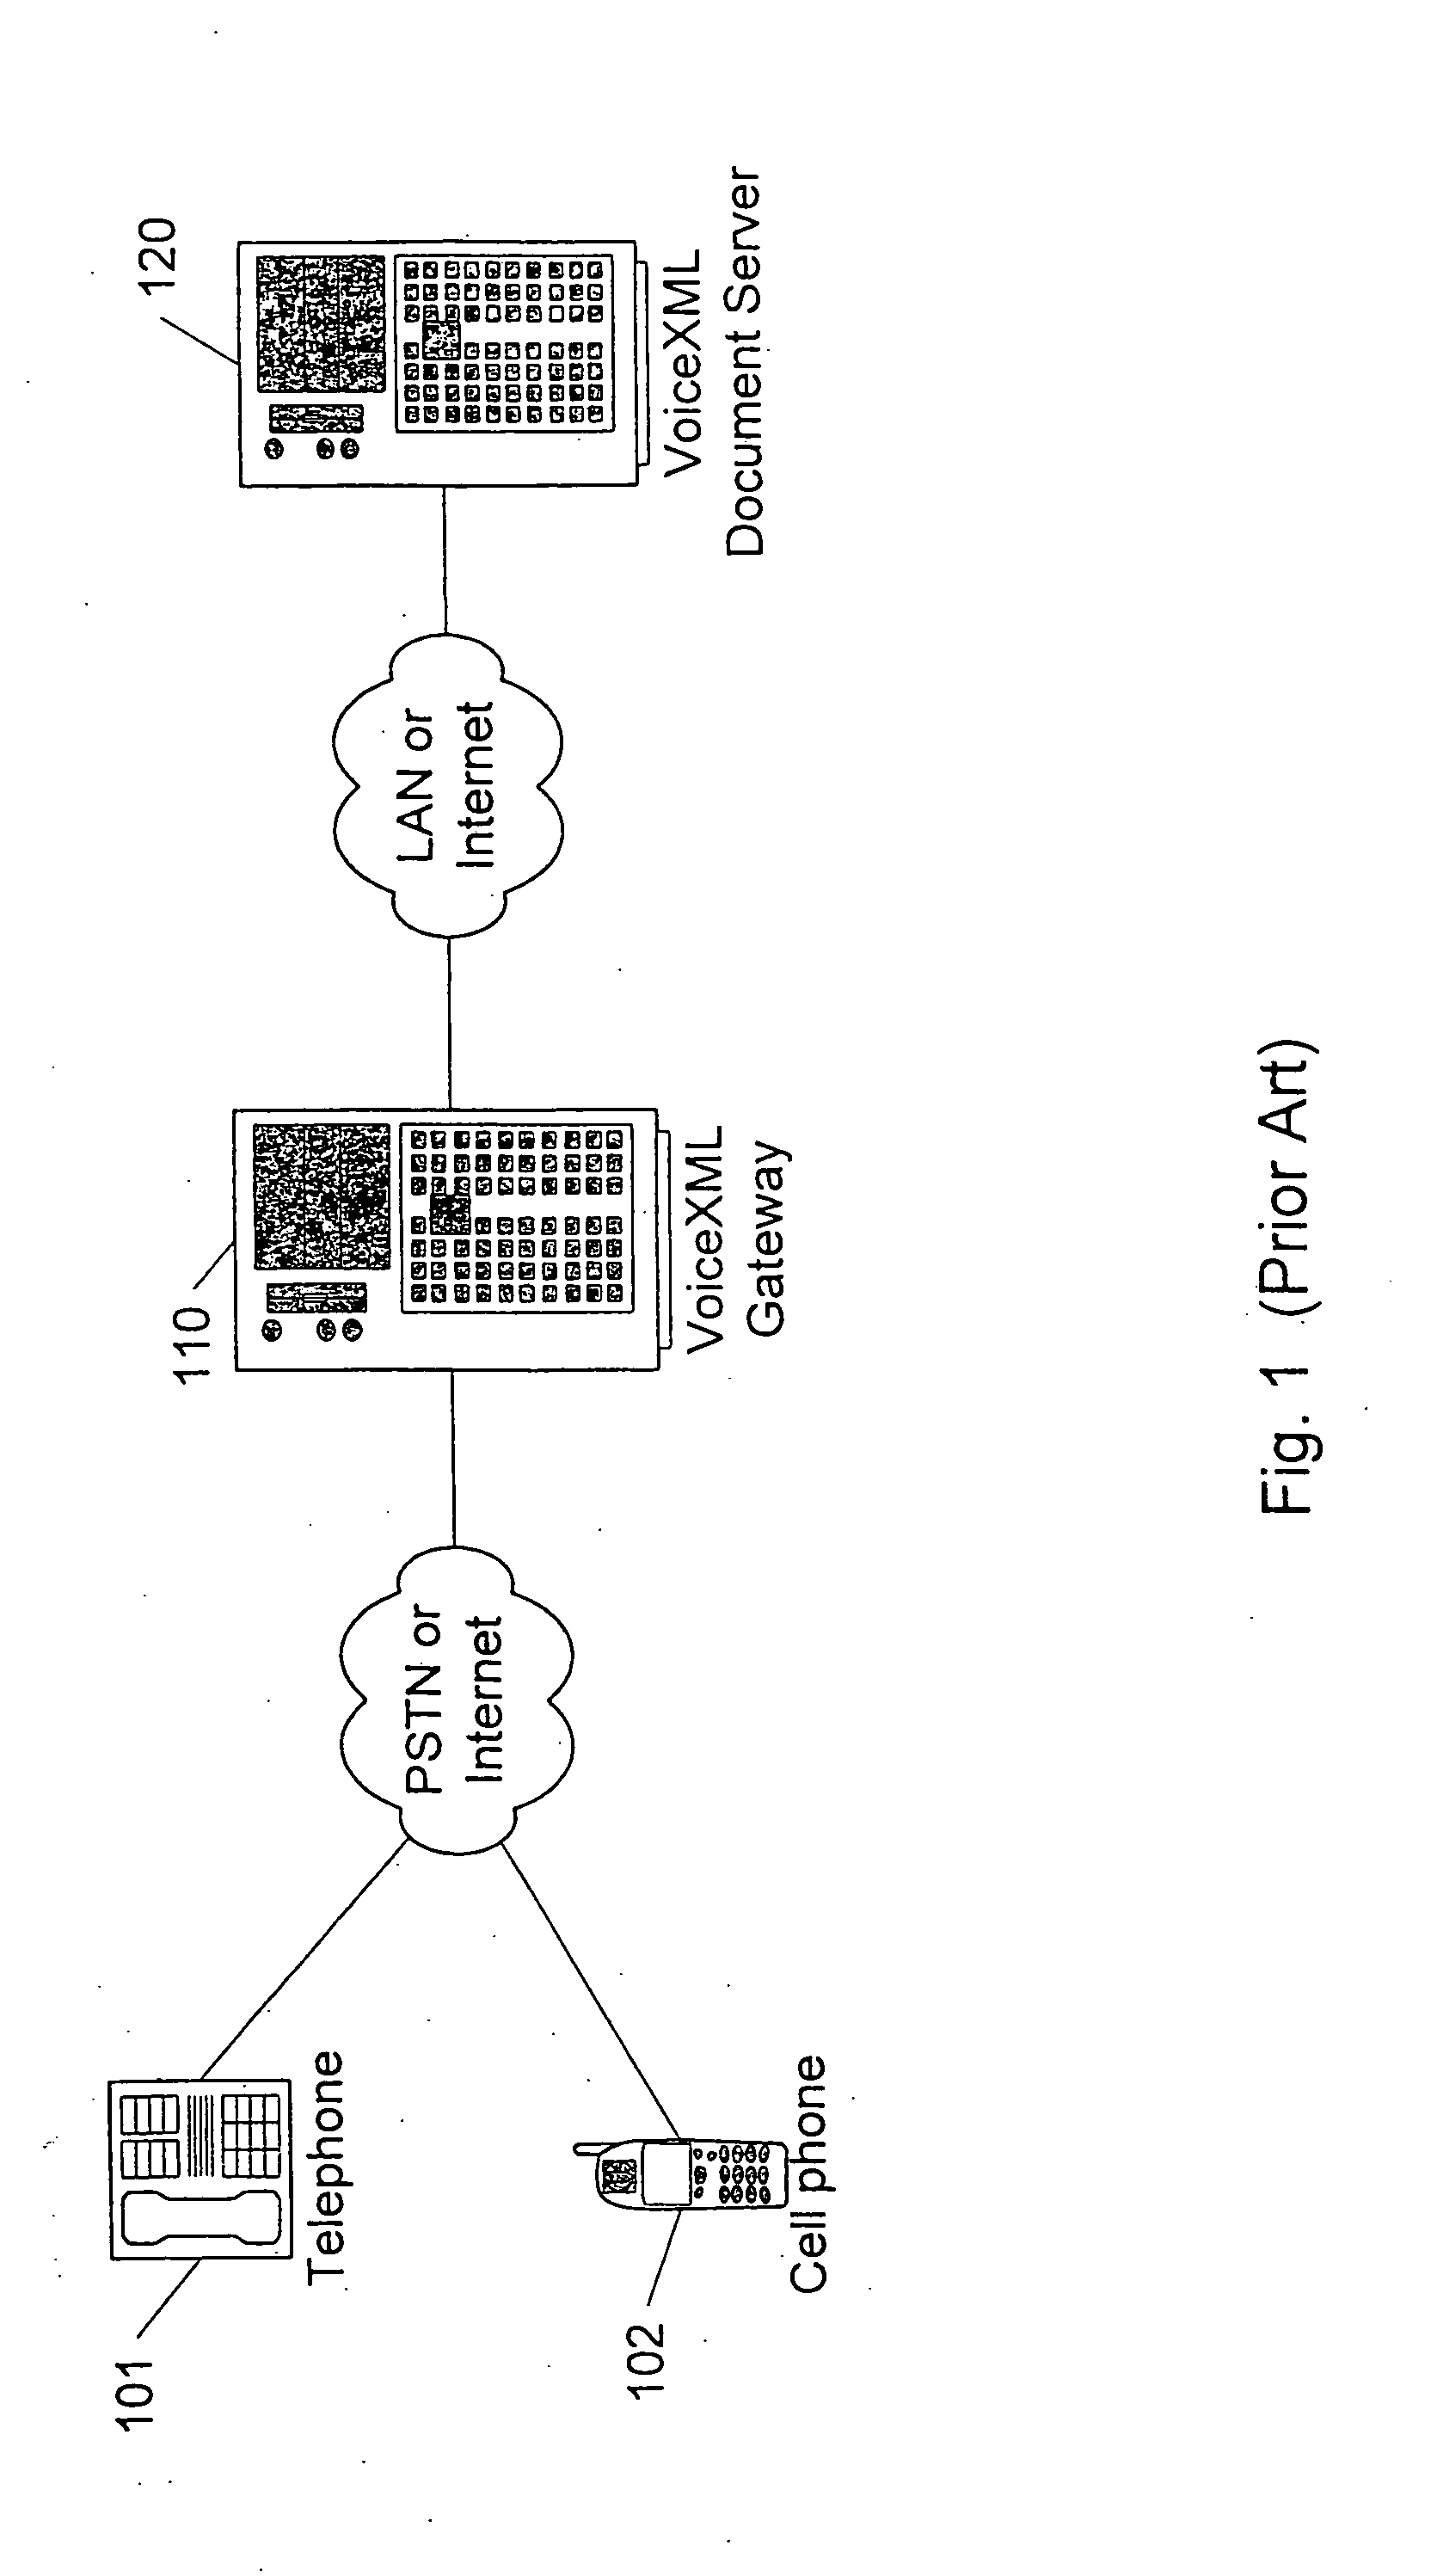 System and method for enhancing performance of VoiceXML gateways